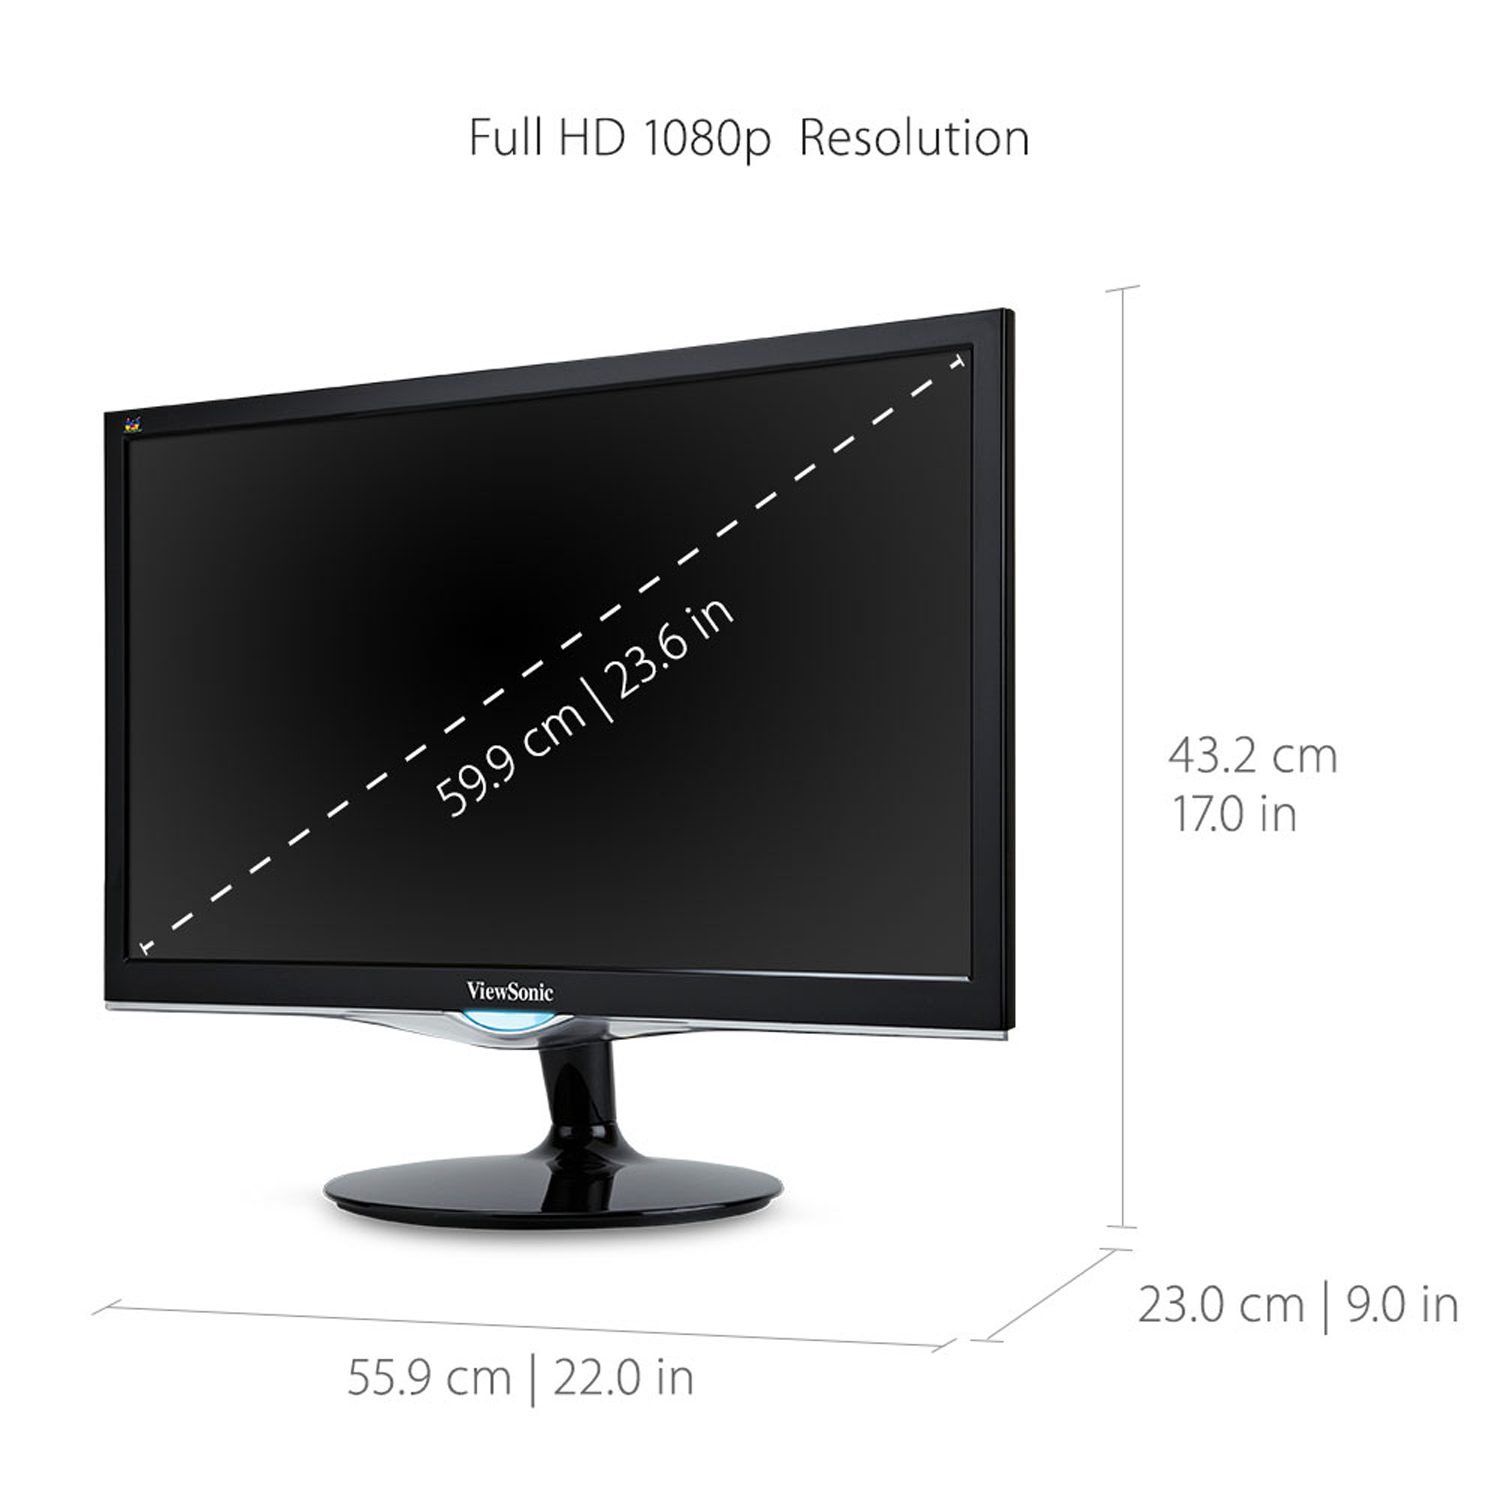 ViewSonic VX2452MH 24 Inch 2ms 60Hz 1080p Gaming Monitor with HDMI DVI and VGA inputs - image 4 of 7